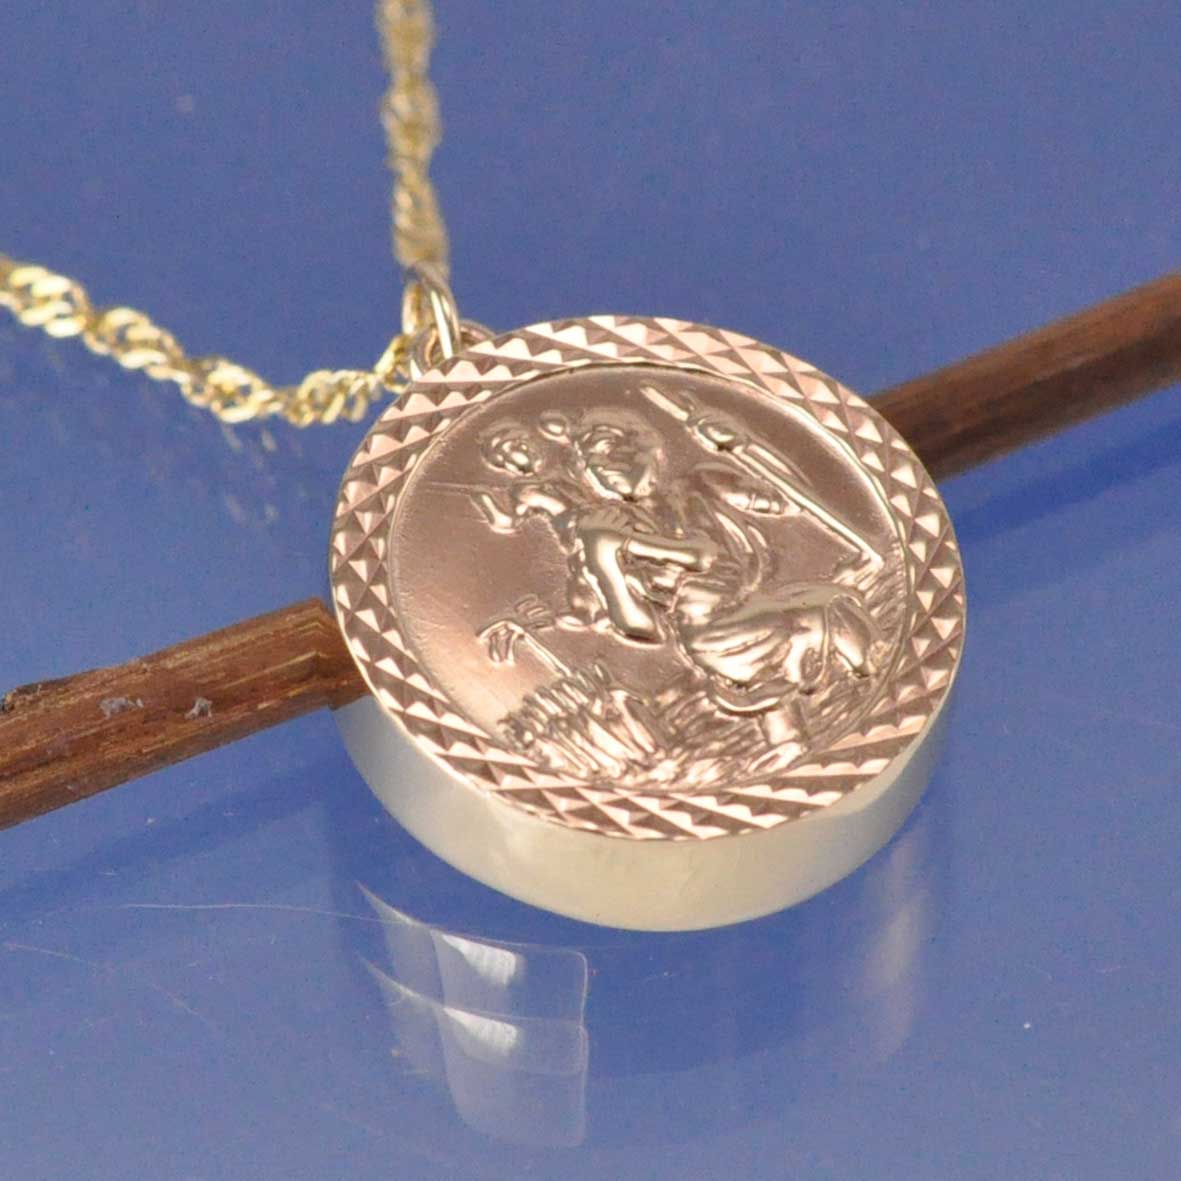 St Christopher Necklace - Convert Your Necklace Into A Cremation Ash Necklace Pendant by Chris Parry Jewellery